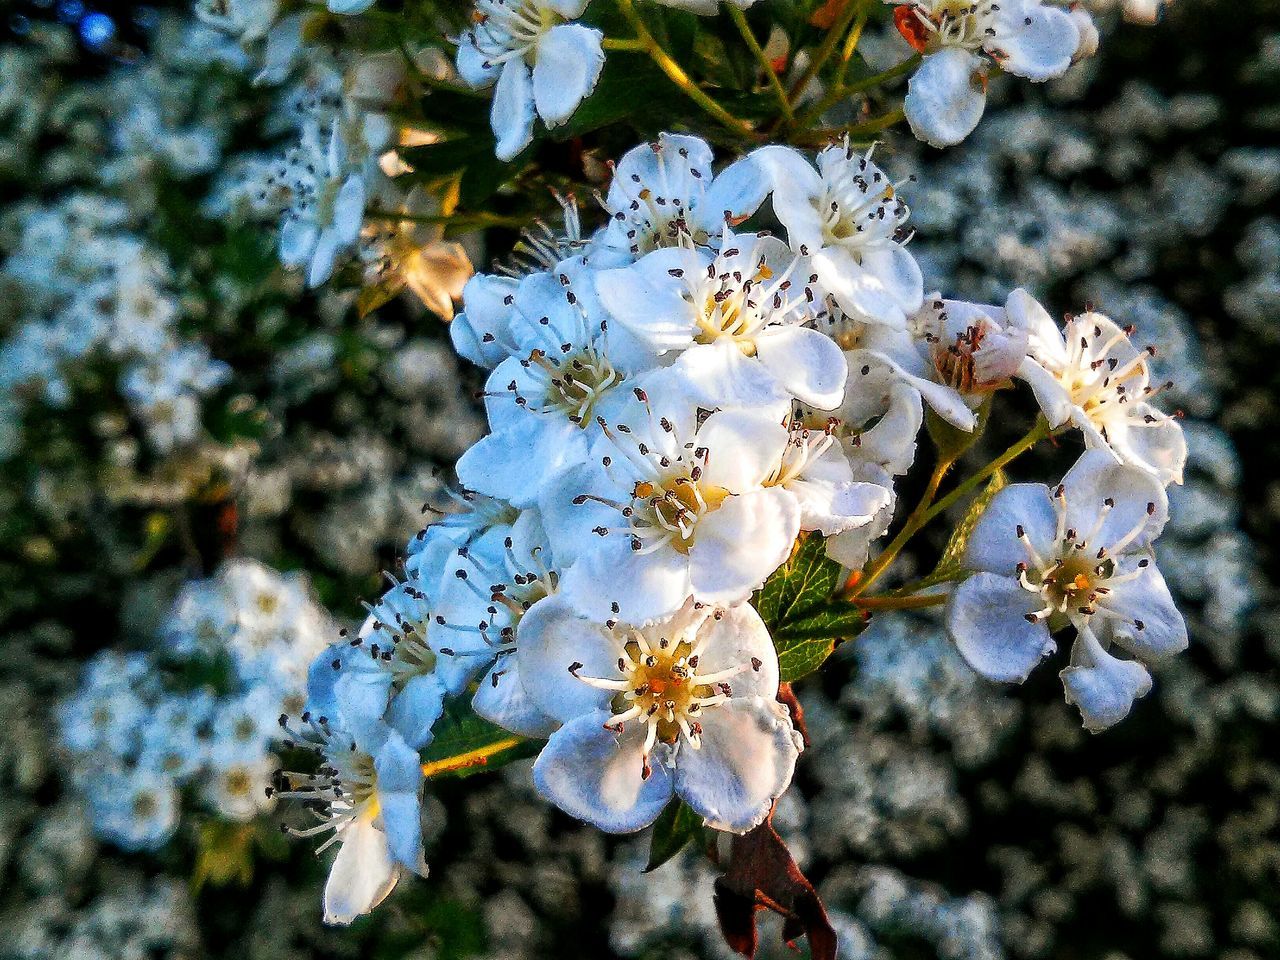 flower, growth, freshness, fragility, water, beauty in nature, petal, nature, blooming, close-up, focus on foreground, plant, white color, flower head, in bloom, tree, high angle view, blossom, day, tranquility